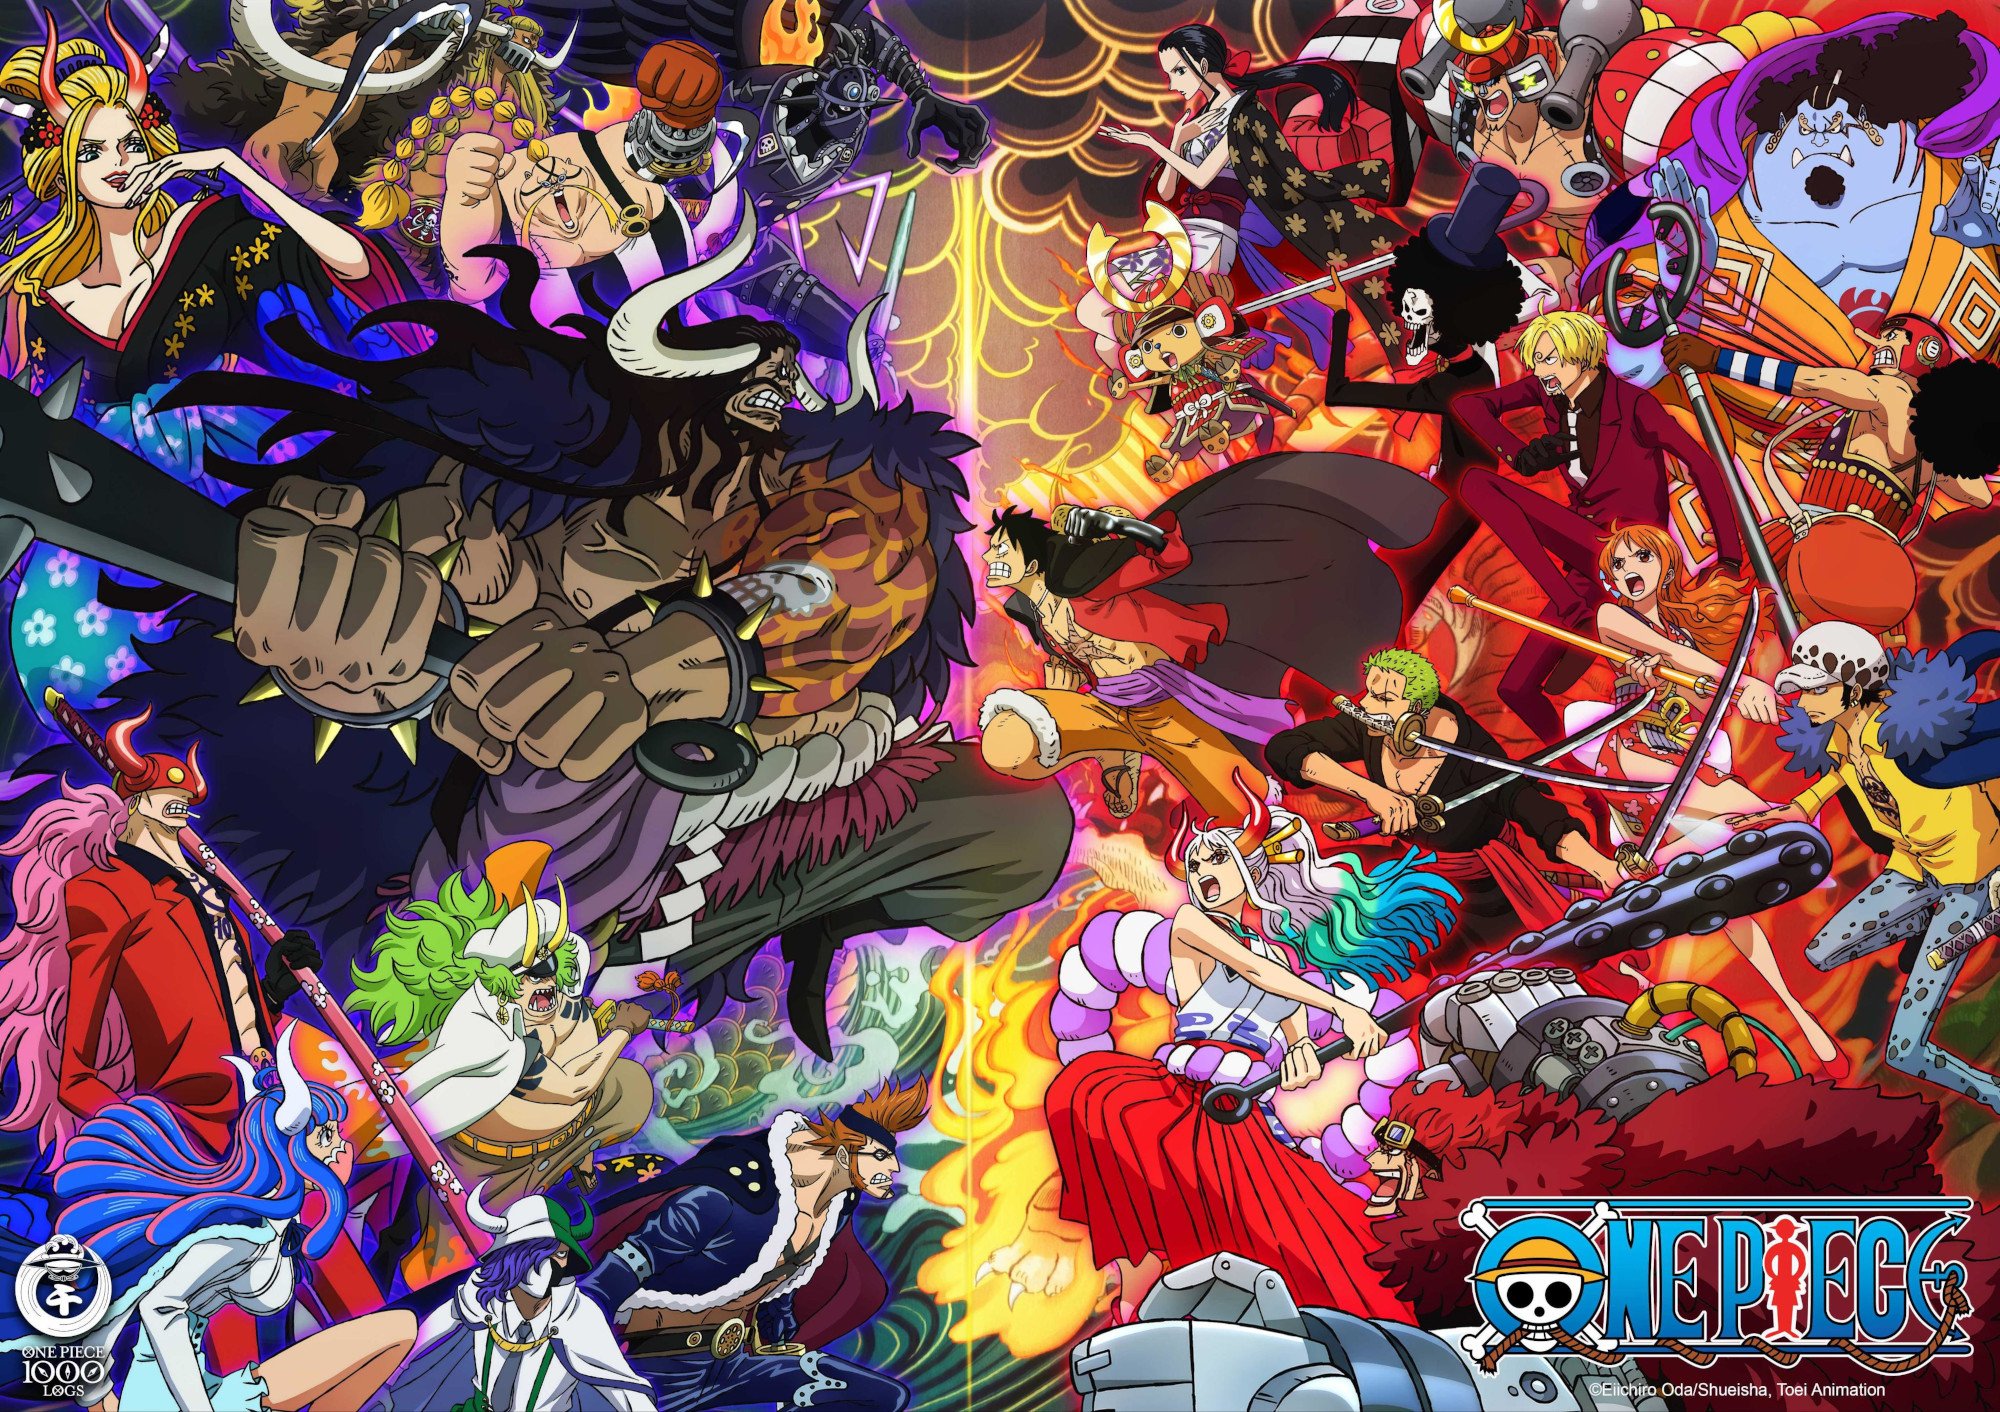 Key art from 'One Piece 1,000' for our article about the manga setting a Guinness World Record. It shows the Straw Hats and their enemies.